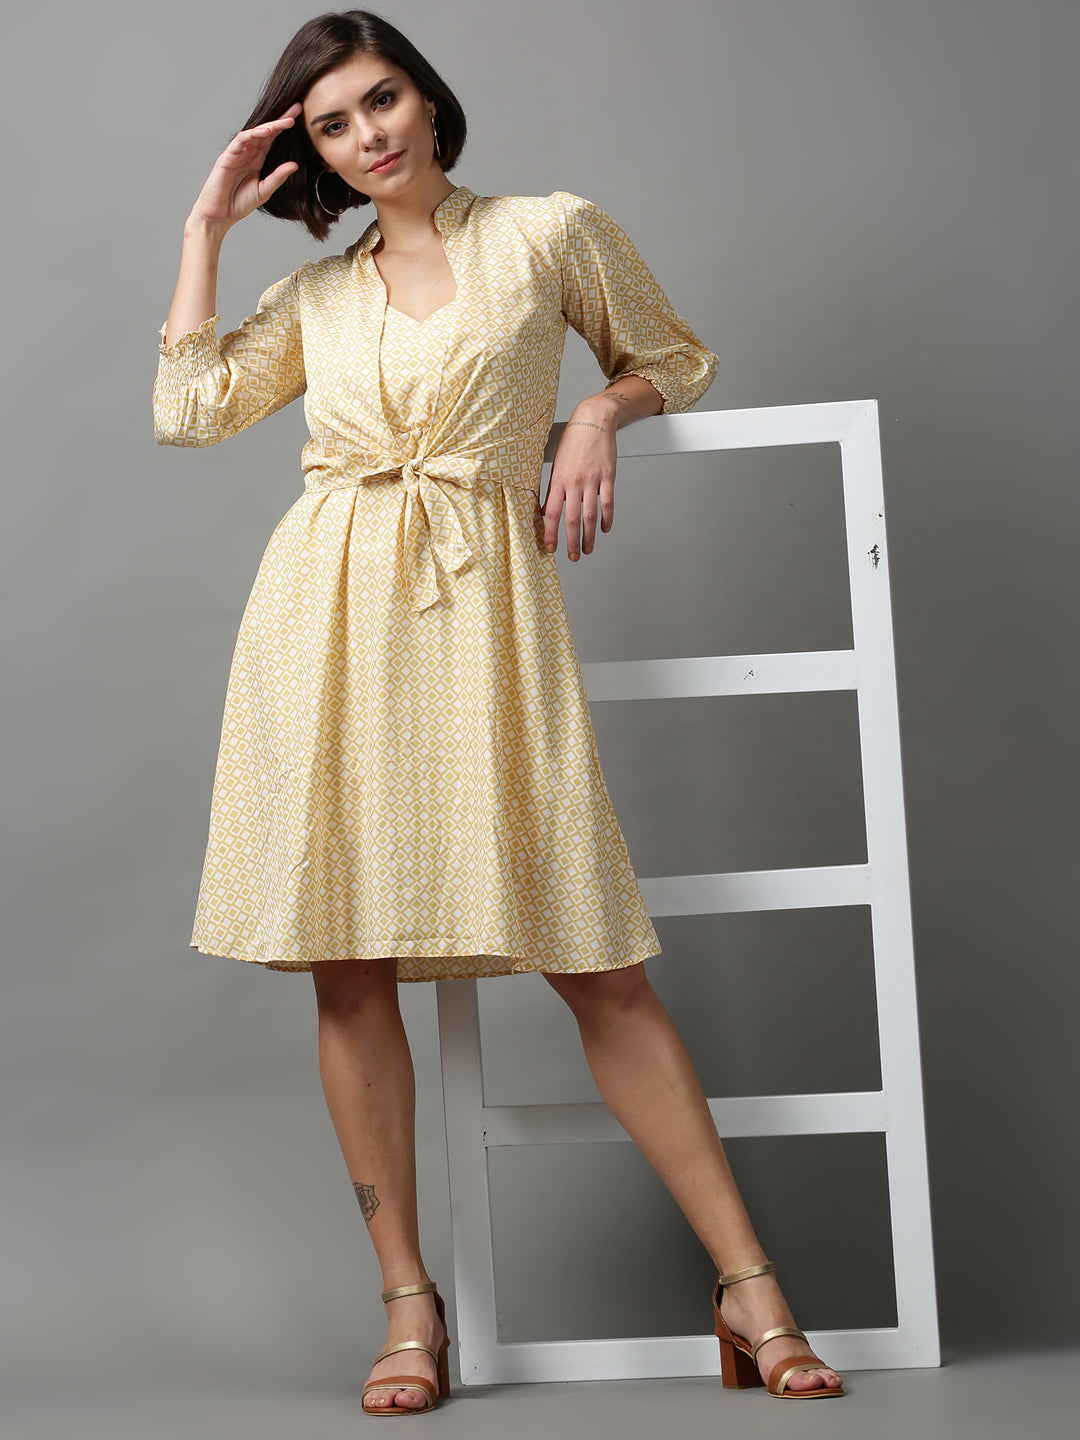 Women's Yellow Printed Fit and Flare Dress